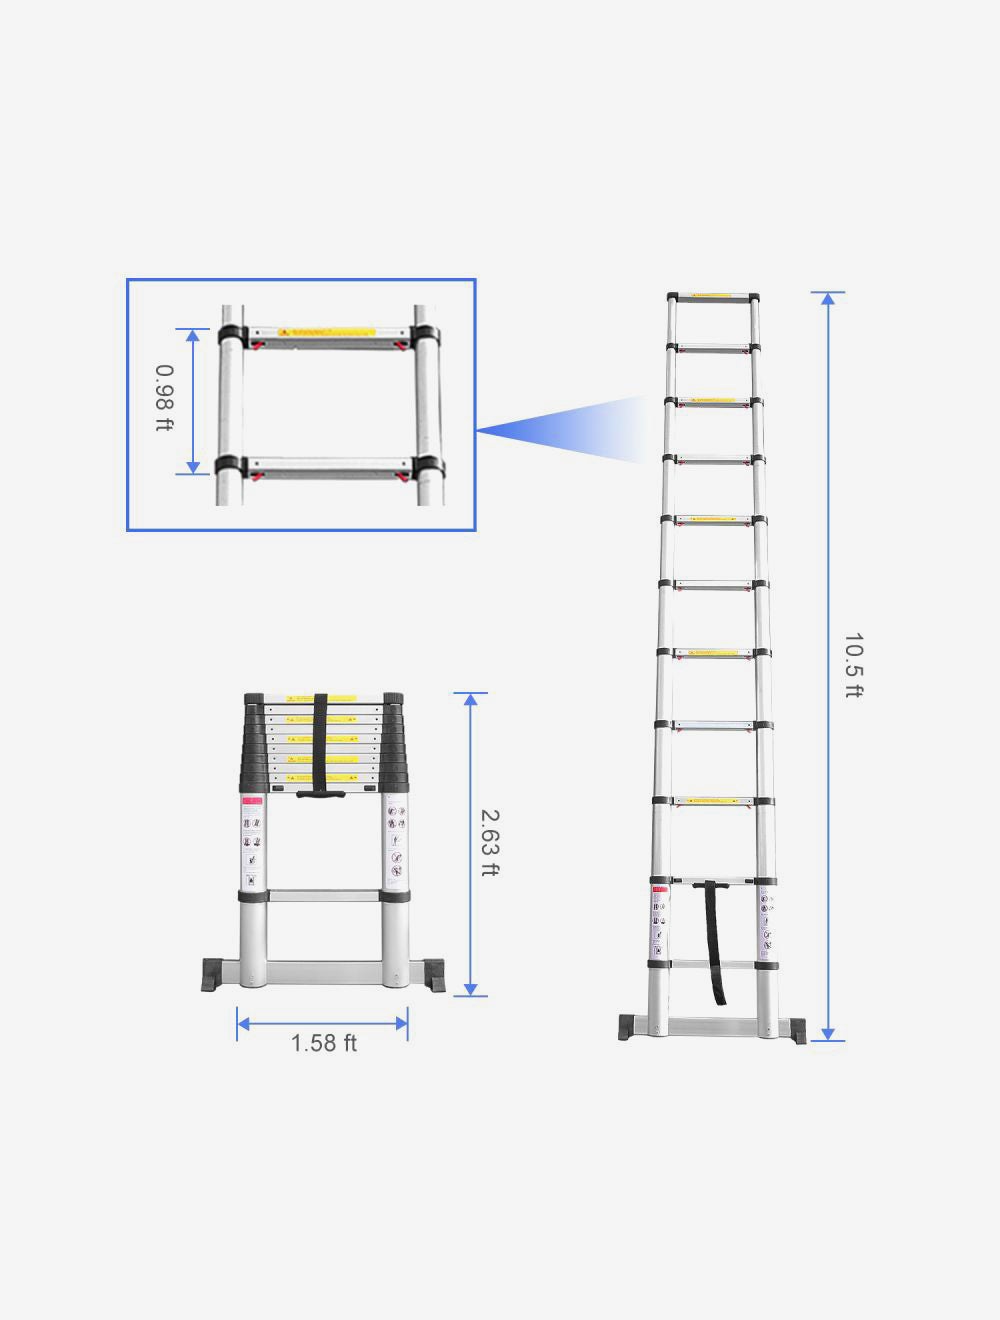 Todeco-Telescopic-Ladder-3-2M-Foldable-Ladder-with-Stabilizer-Bar-One-Button-Retraction-Mechanism-Aluminum-Ladder-Loadable-Up-to-150-kg